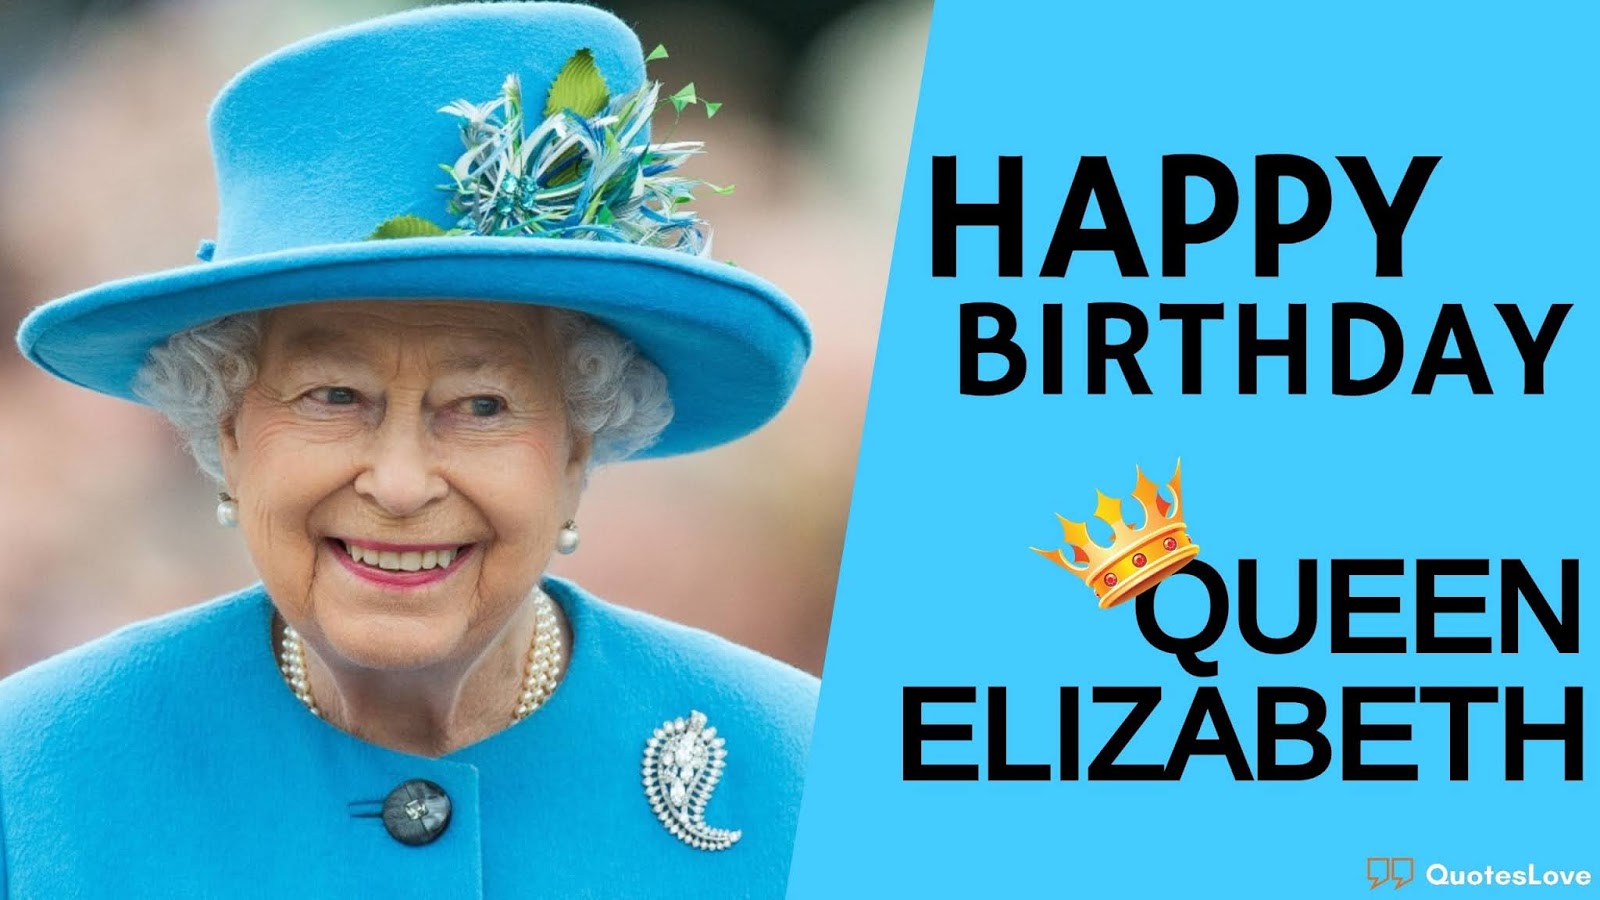 Queen's Birthday Images, Pictures, Posters